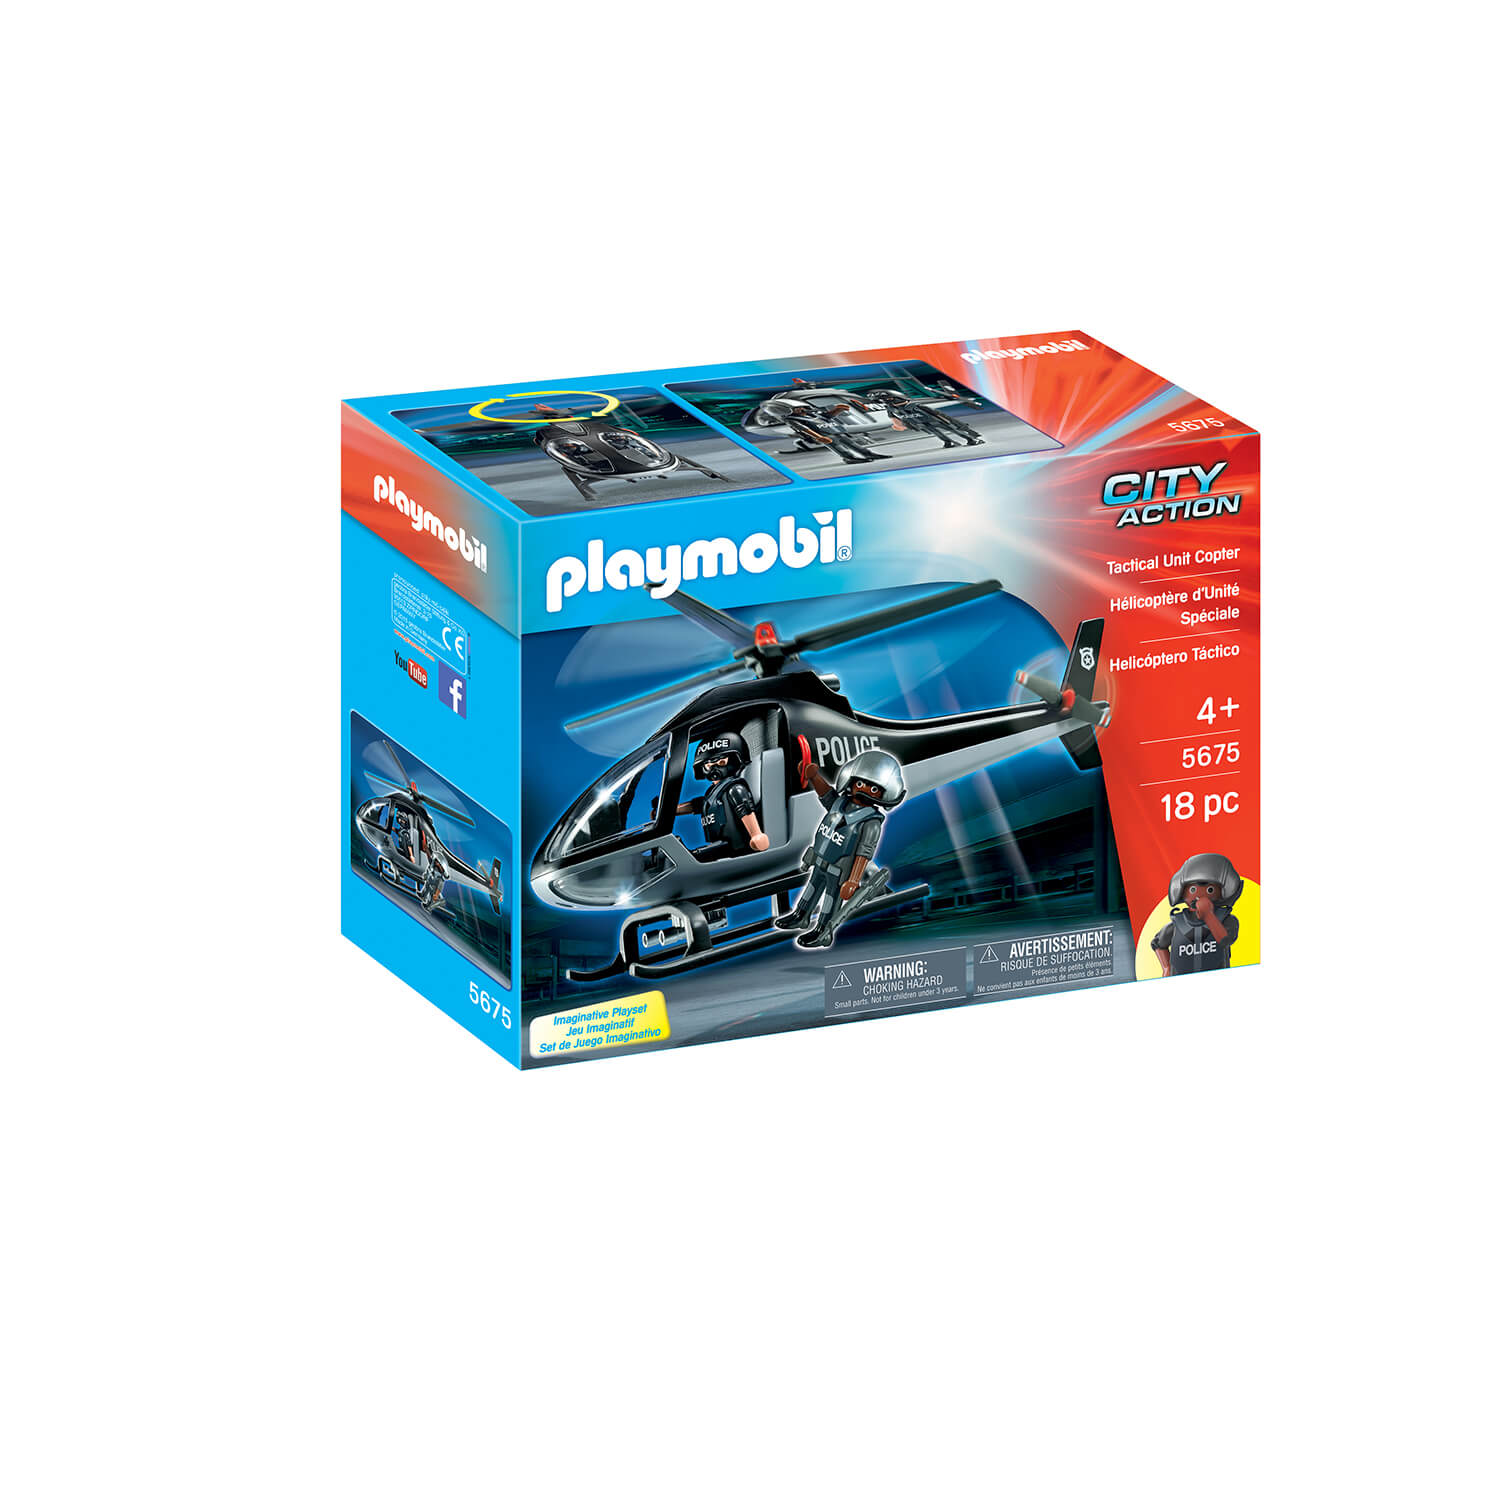 PLAYMOBIL Vehicle Tactical Unit Copter (5675)